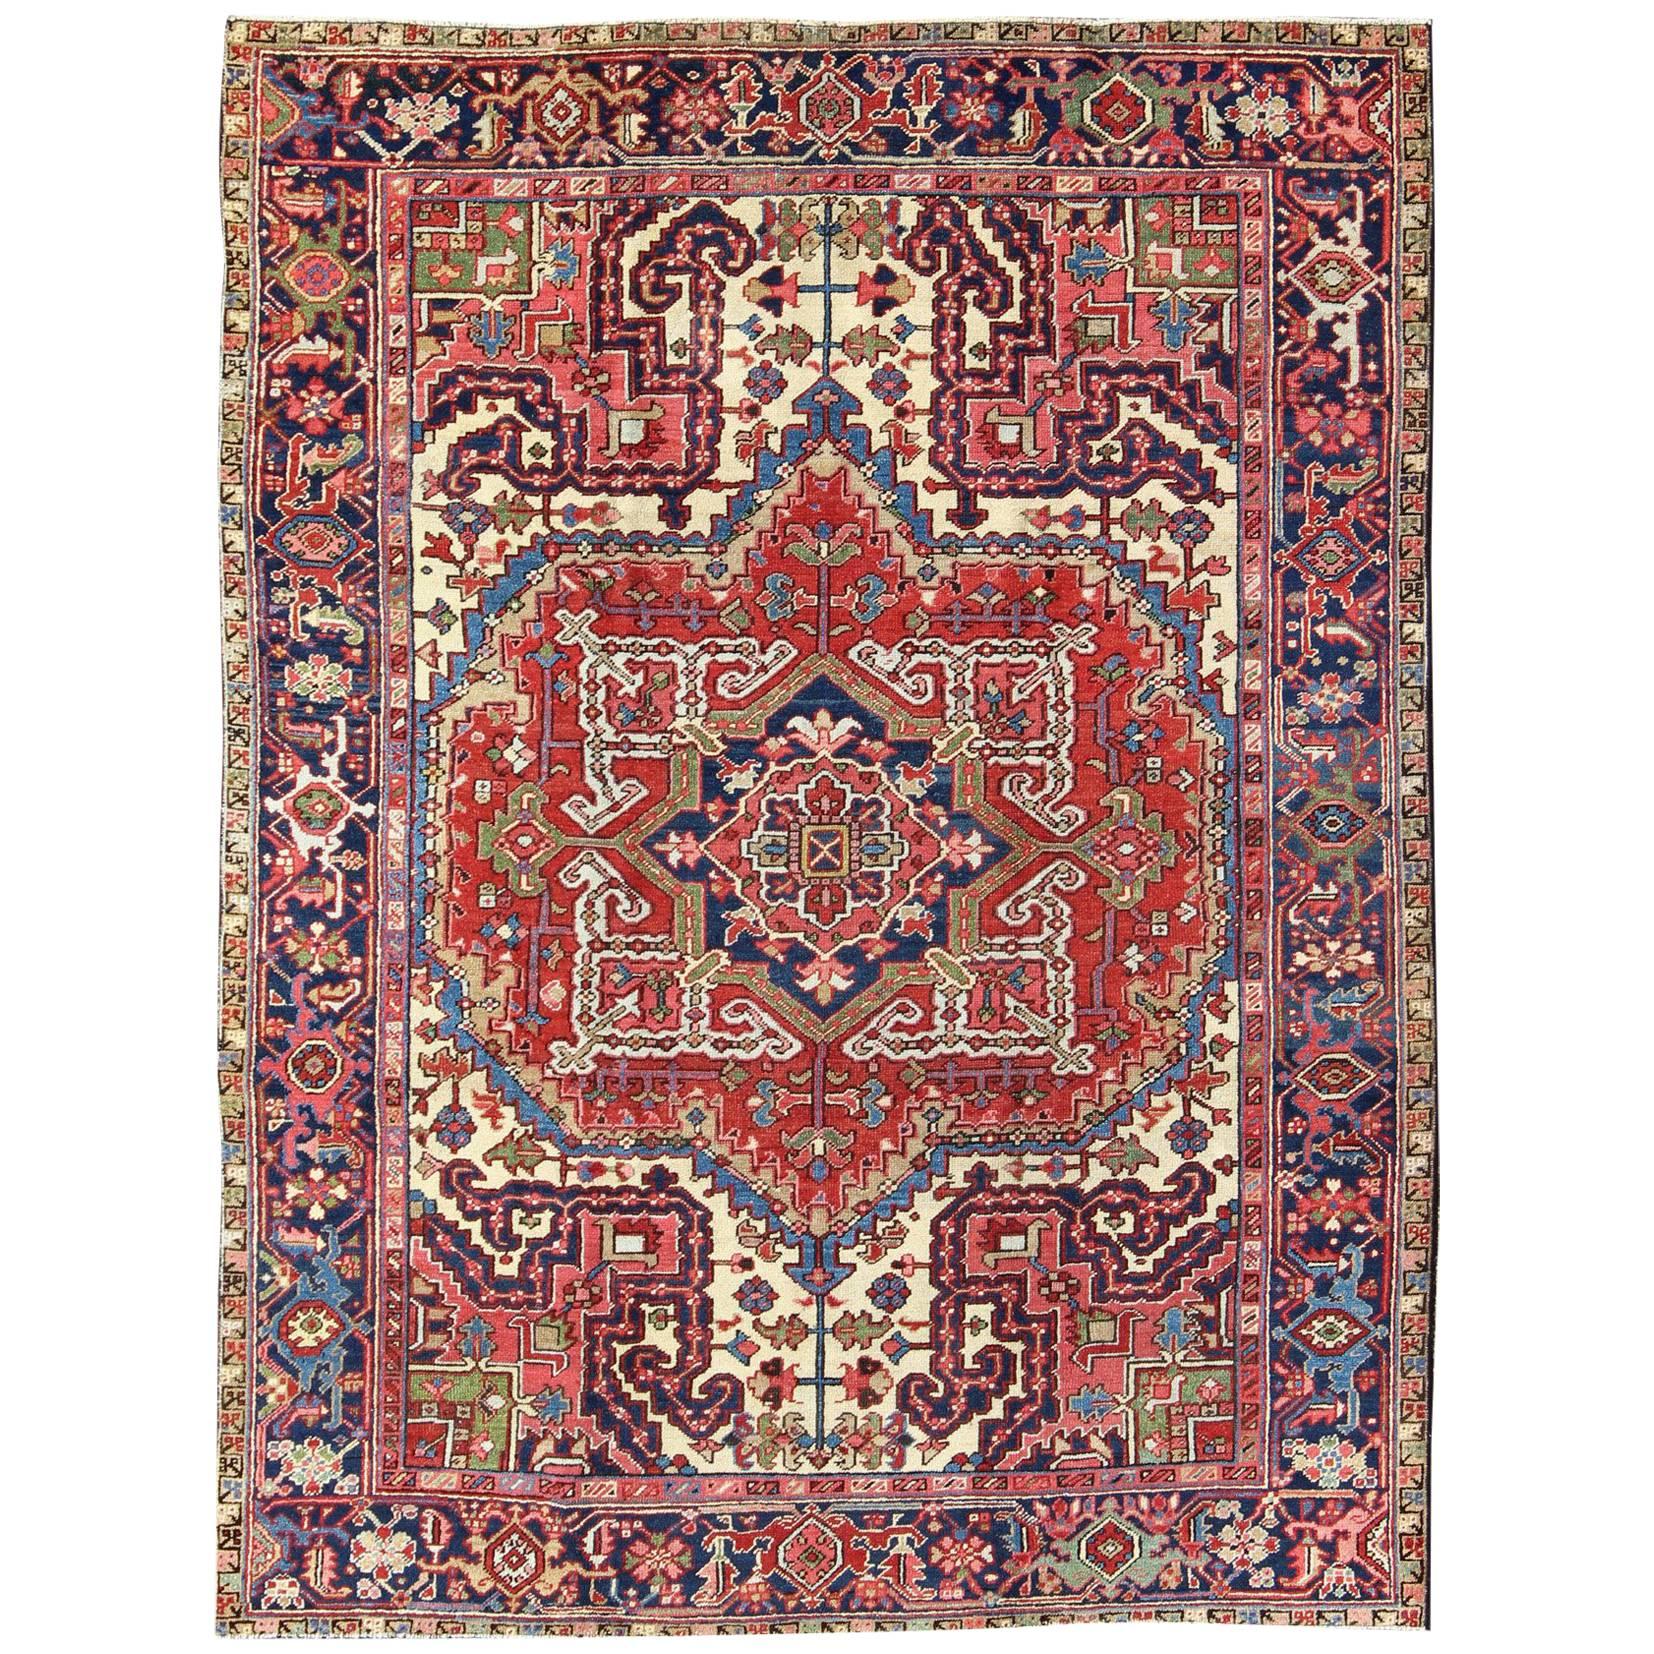 Antique Persian Heriz Carpet with Stylized Central Medallion in Warm Hues of Red